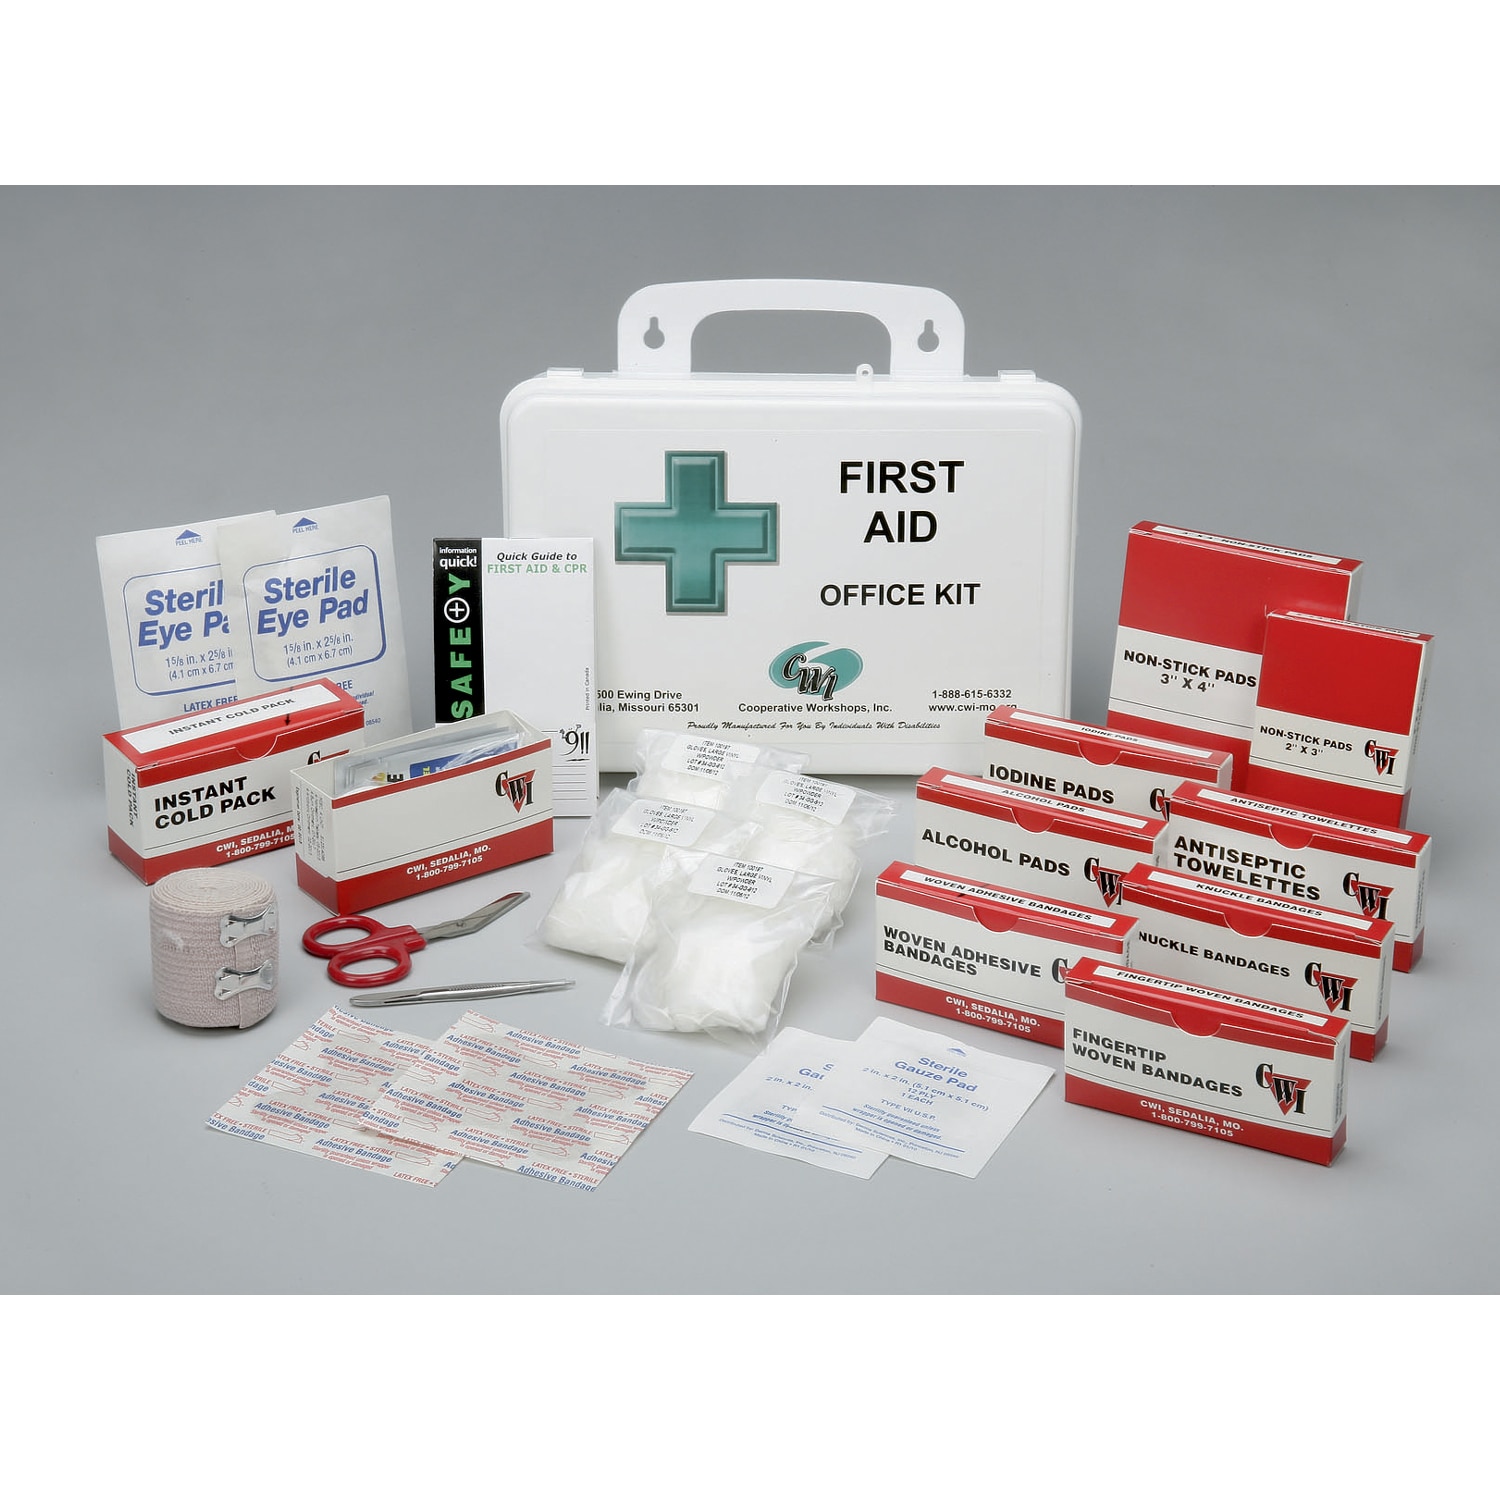 Kit, First Aid, Office, 10-15 Person